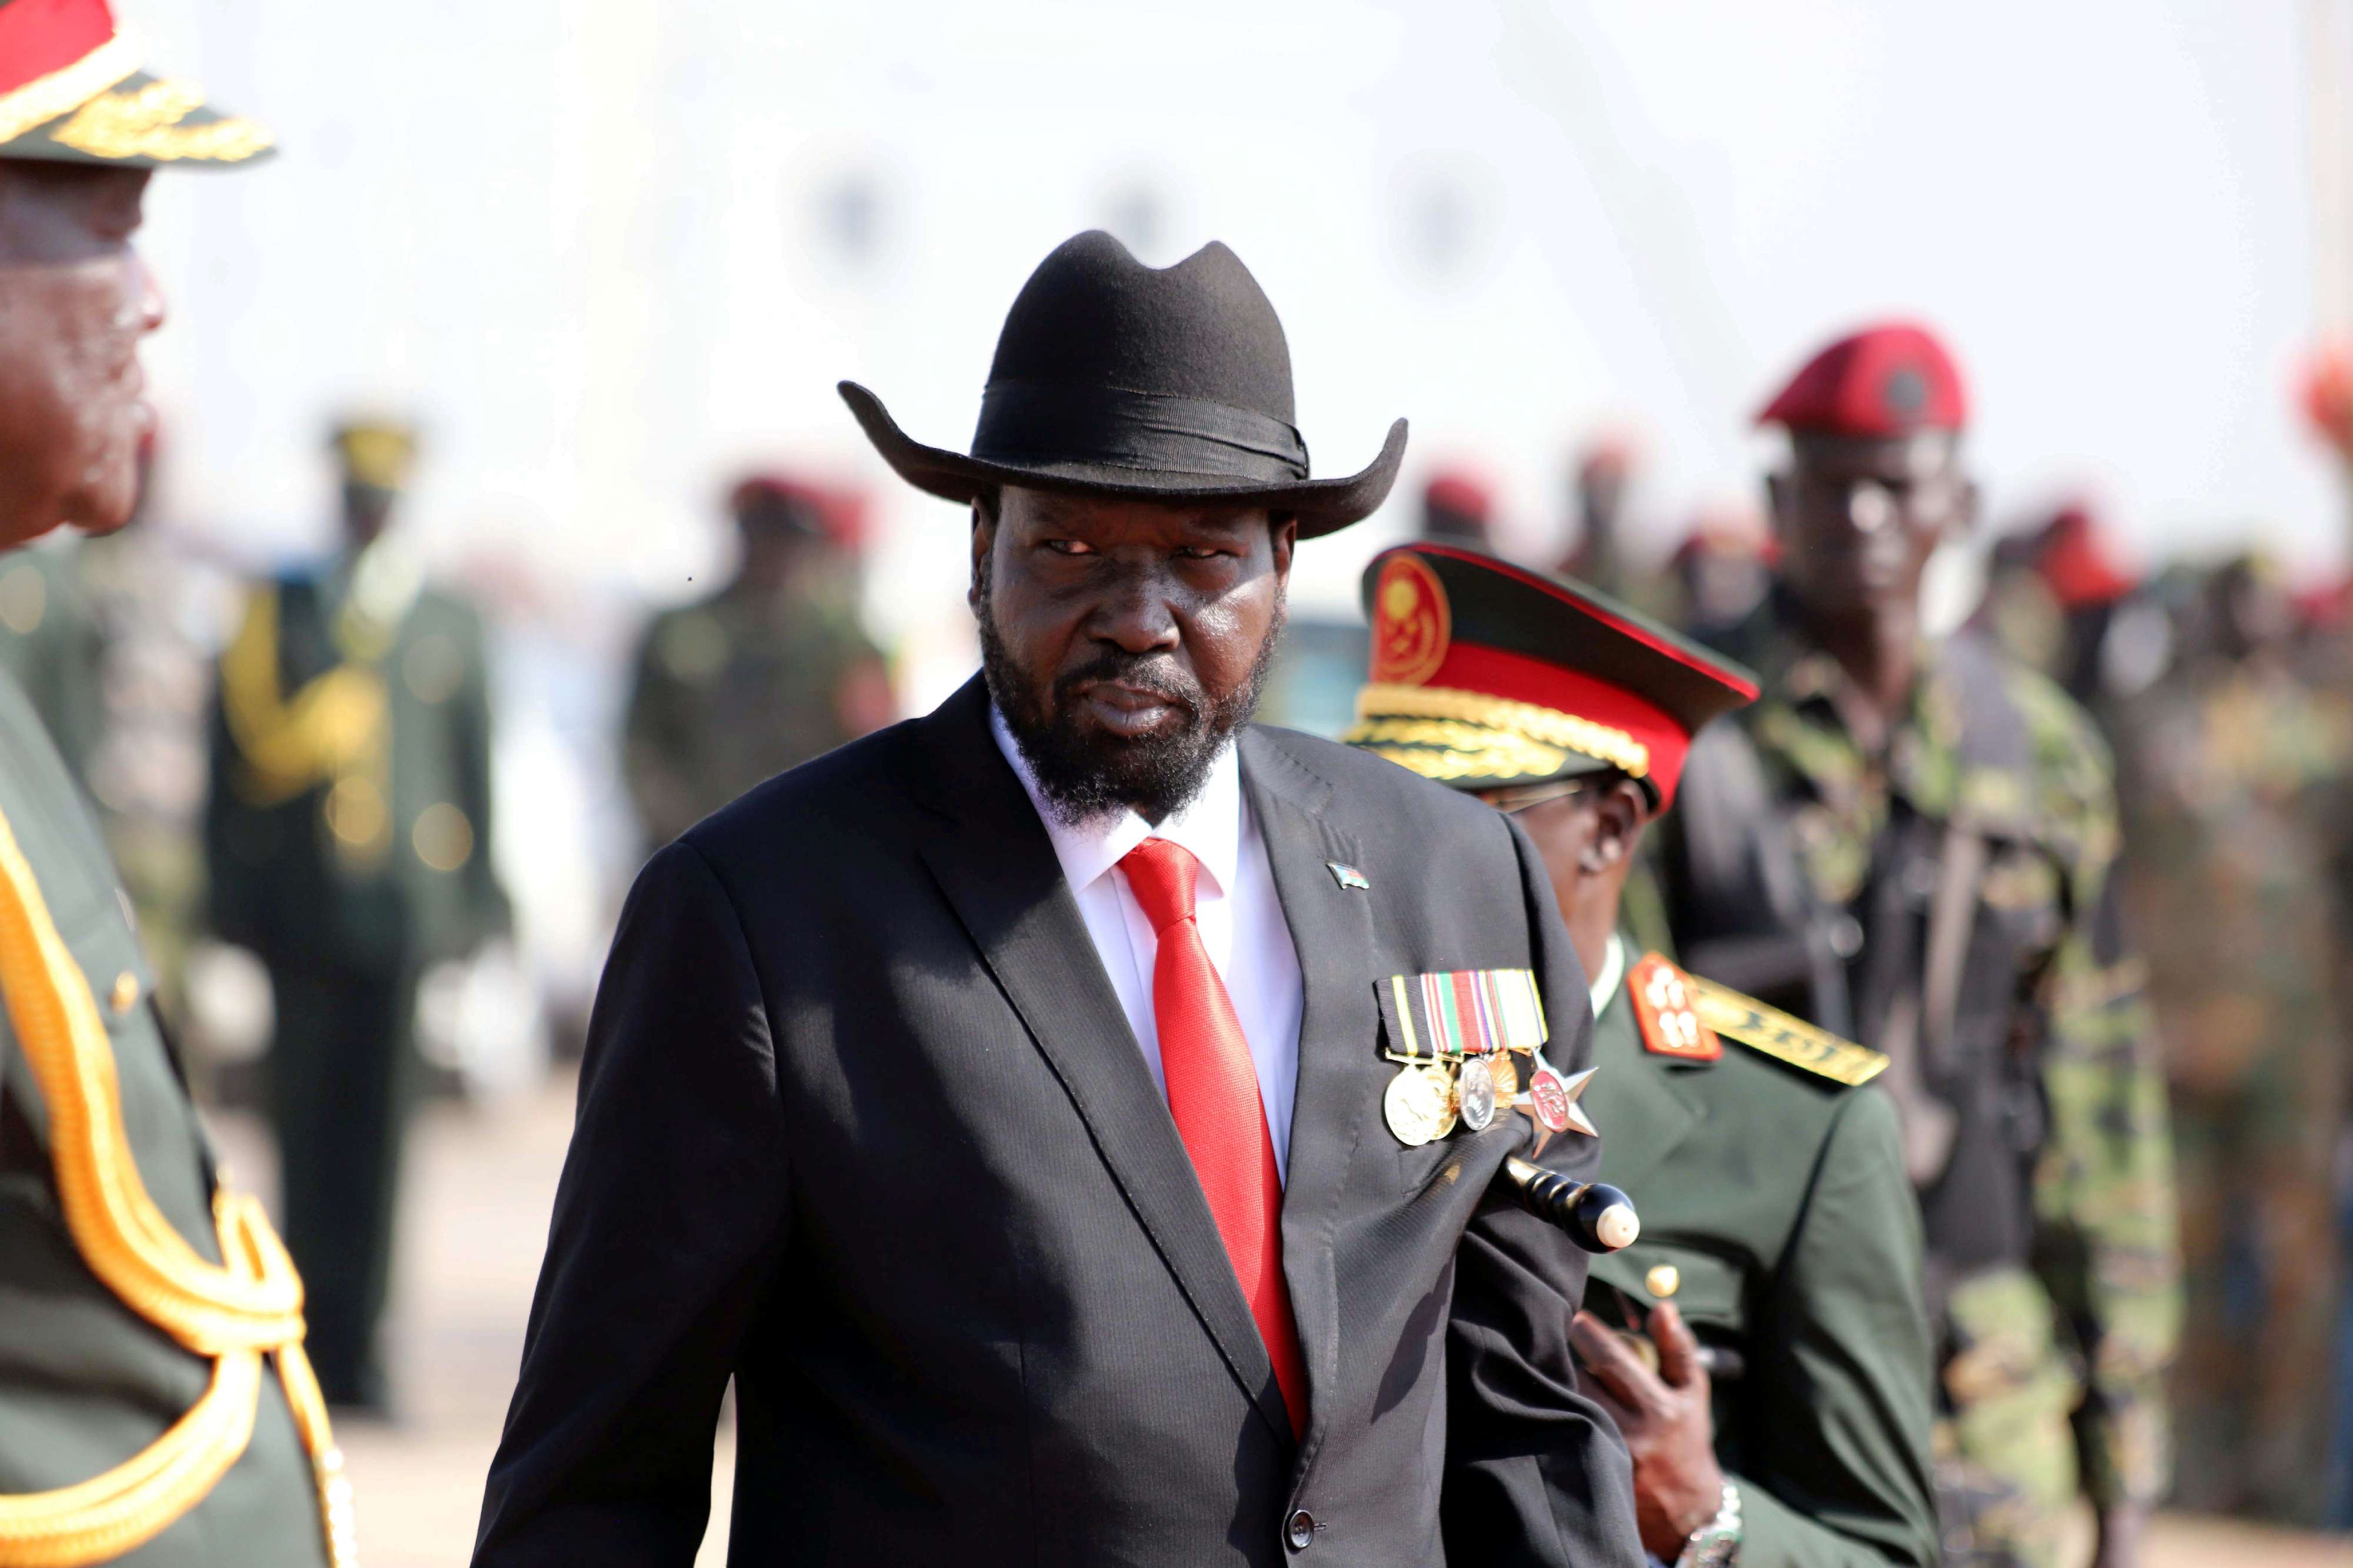 South Sudan's war broke out two years after independence, after Kiir accused his Machar, his former vice president, of plotting a coup against him